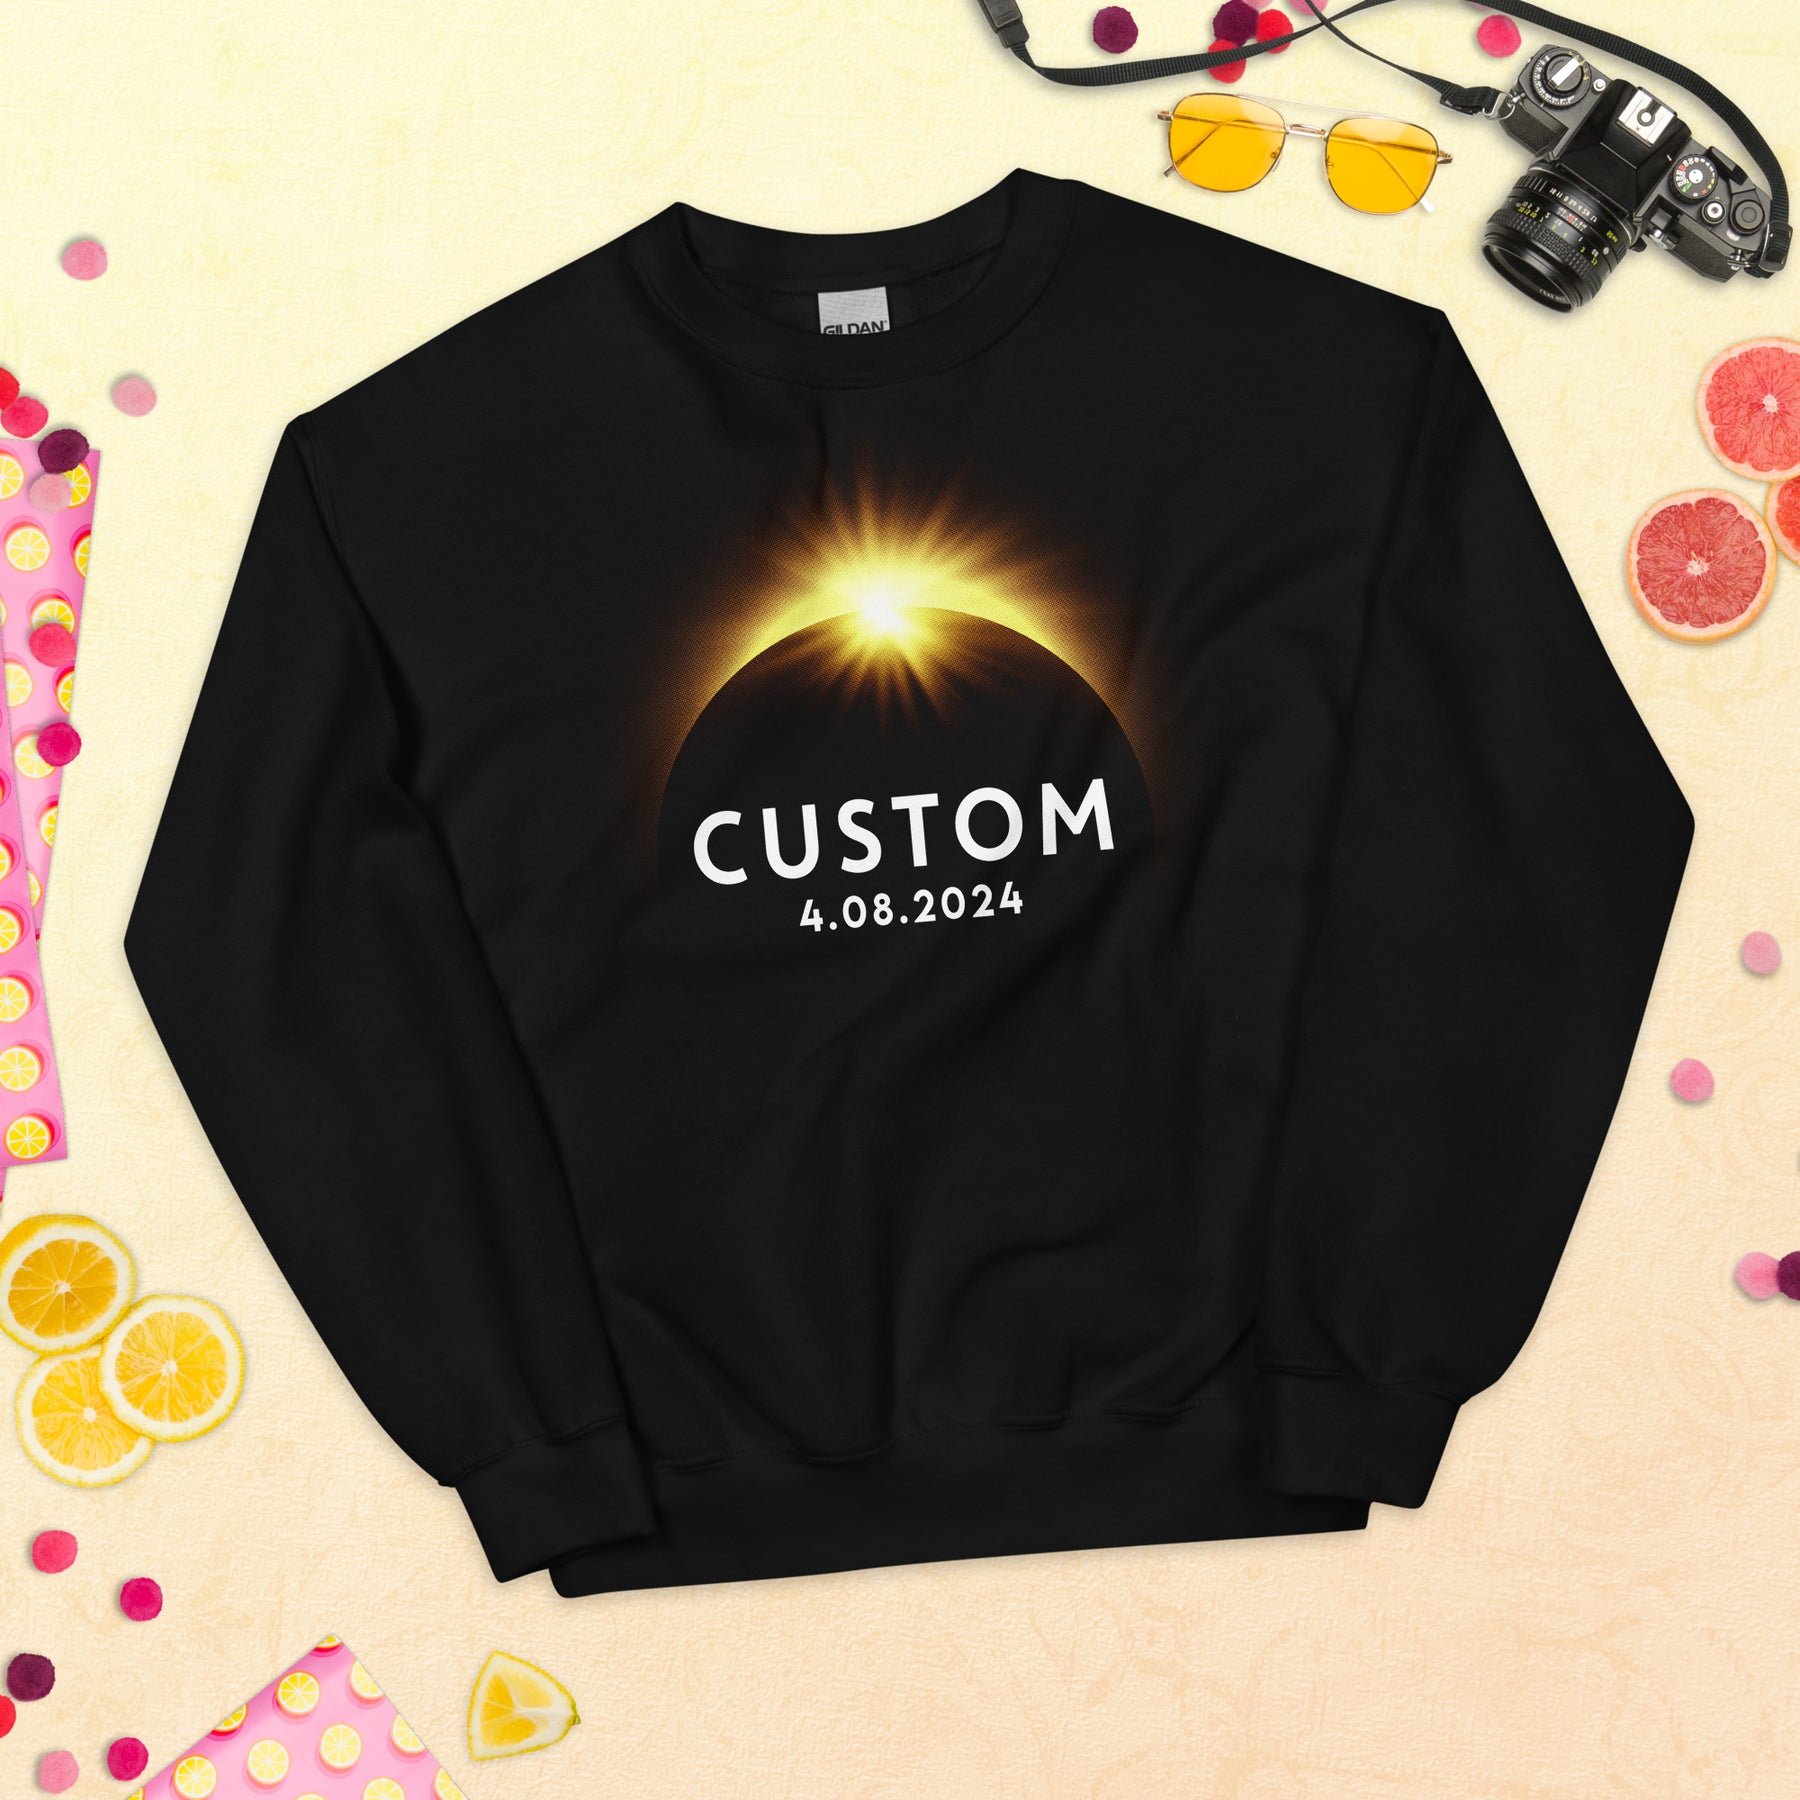 USA Total Solar Eclipse Sweatshirt - April 8, 2024, Custom City State,  Eclipse Viewing Sweater, Astronomy Gift